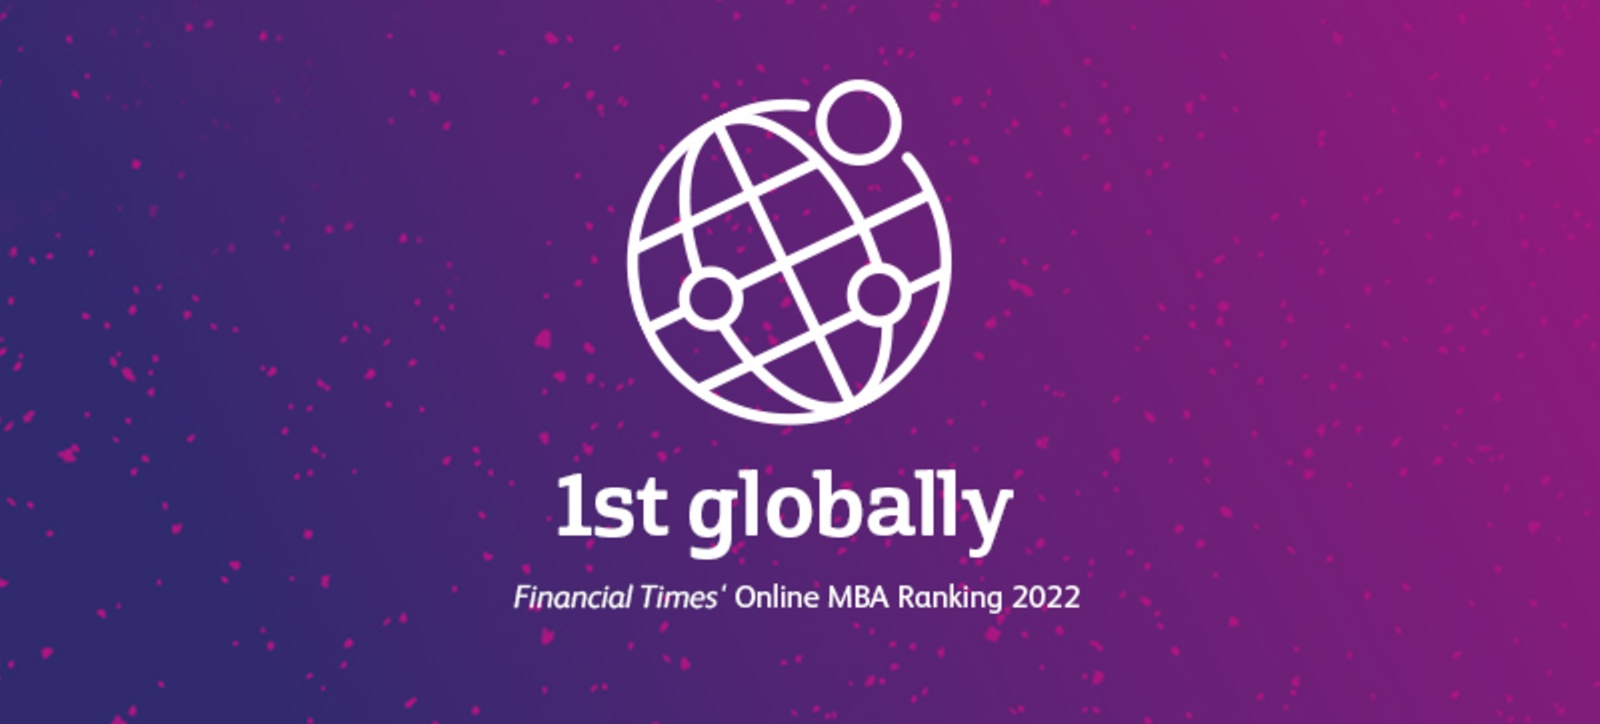 WBS DLMBA ranked best in the world for fifth year running